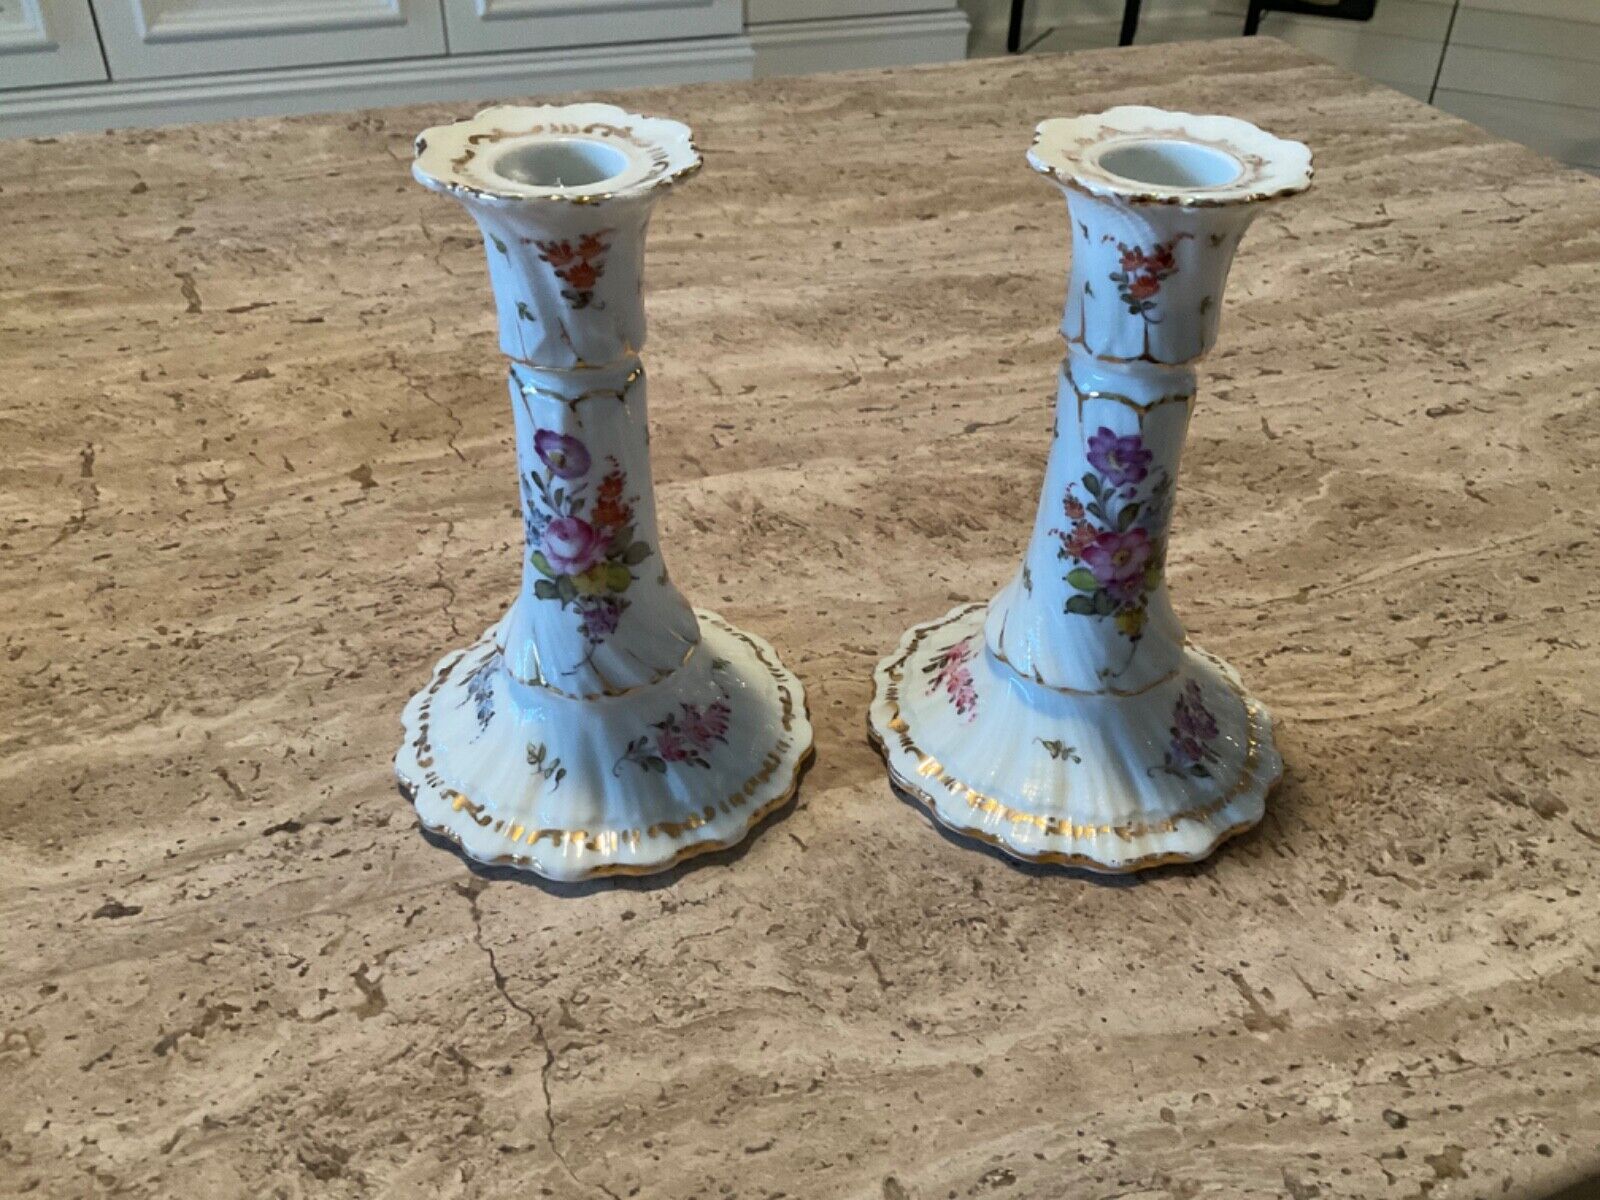 2 Matching Hand-painted Candlesticks by Martial Redon of Limoges, France